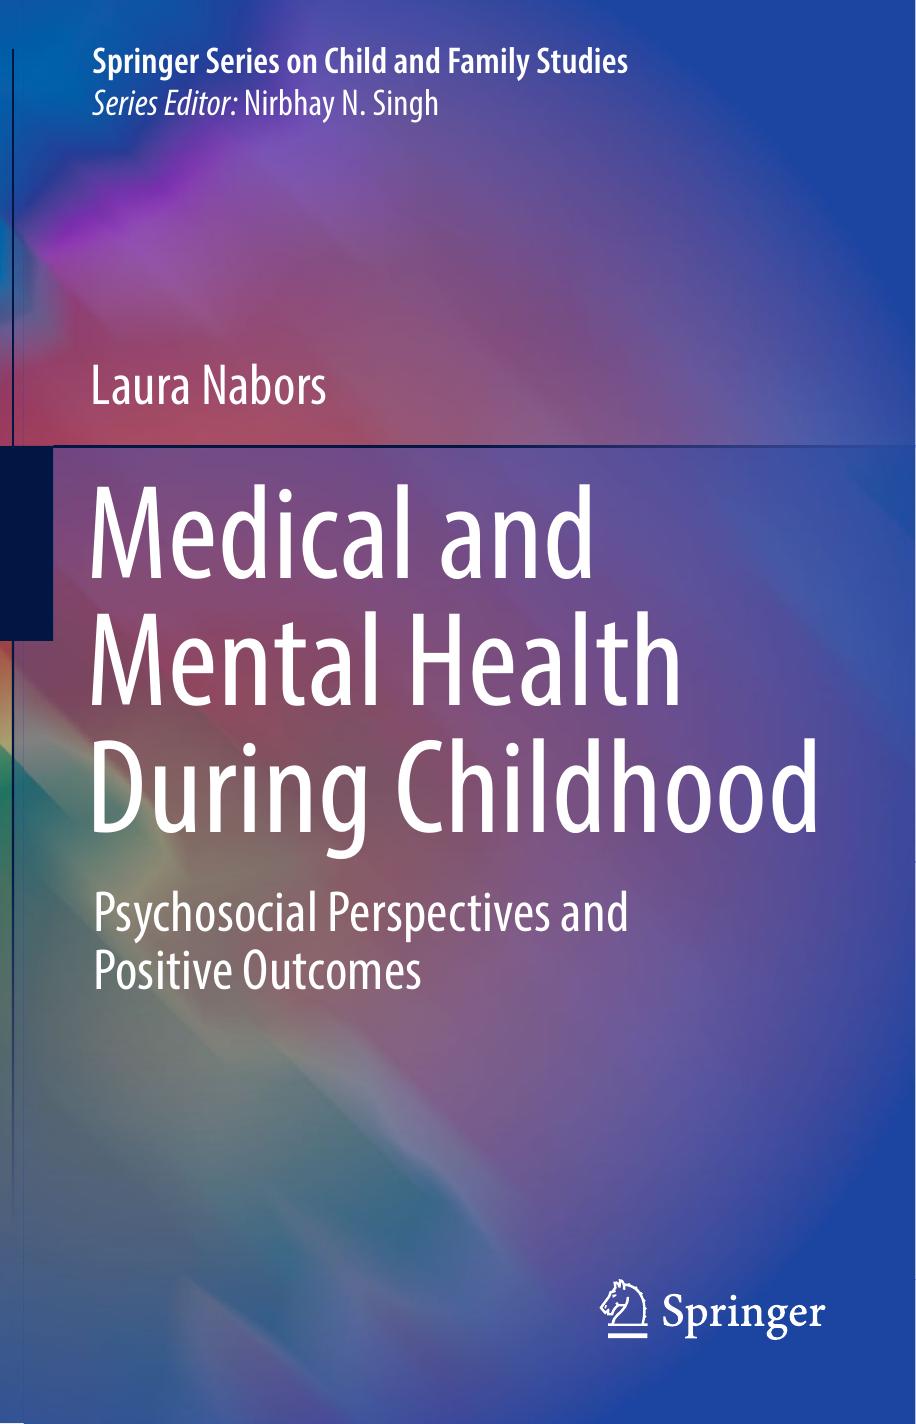 Medical and Mental Health During Childhood  Psychosocial Perspectives and Positive Outcomes (2016)